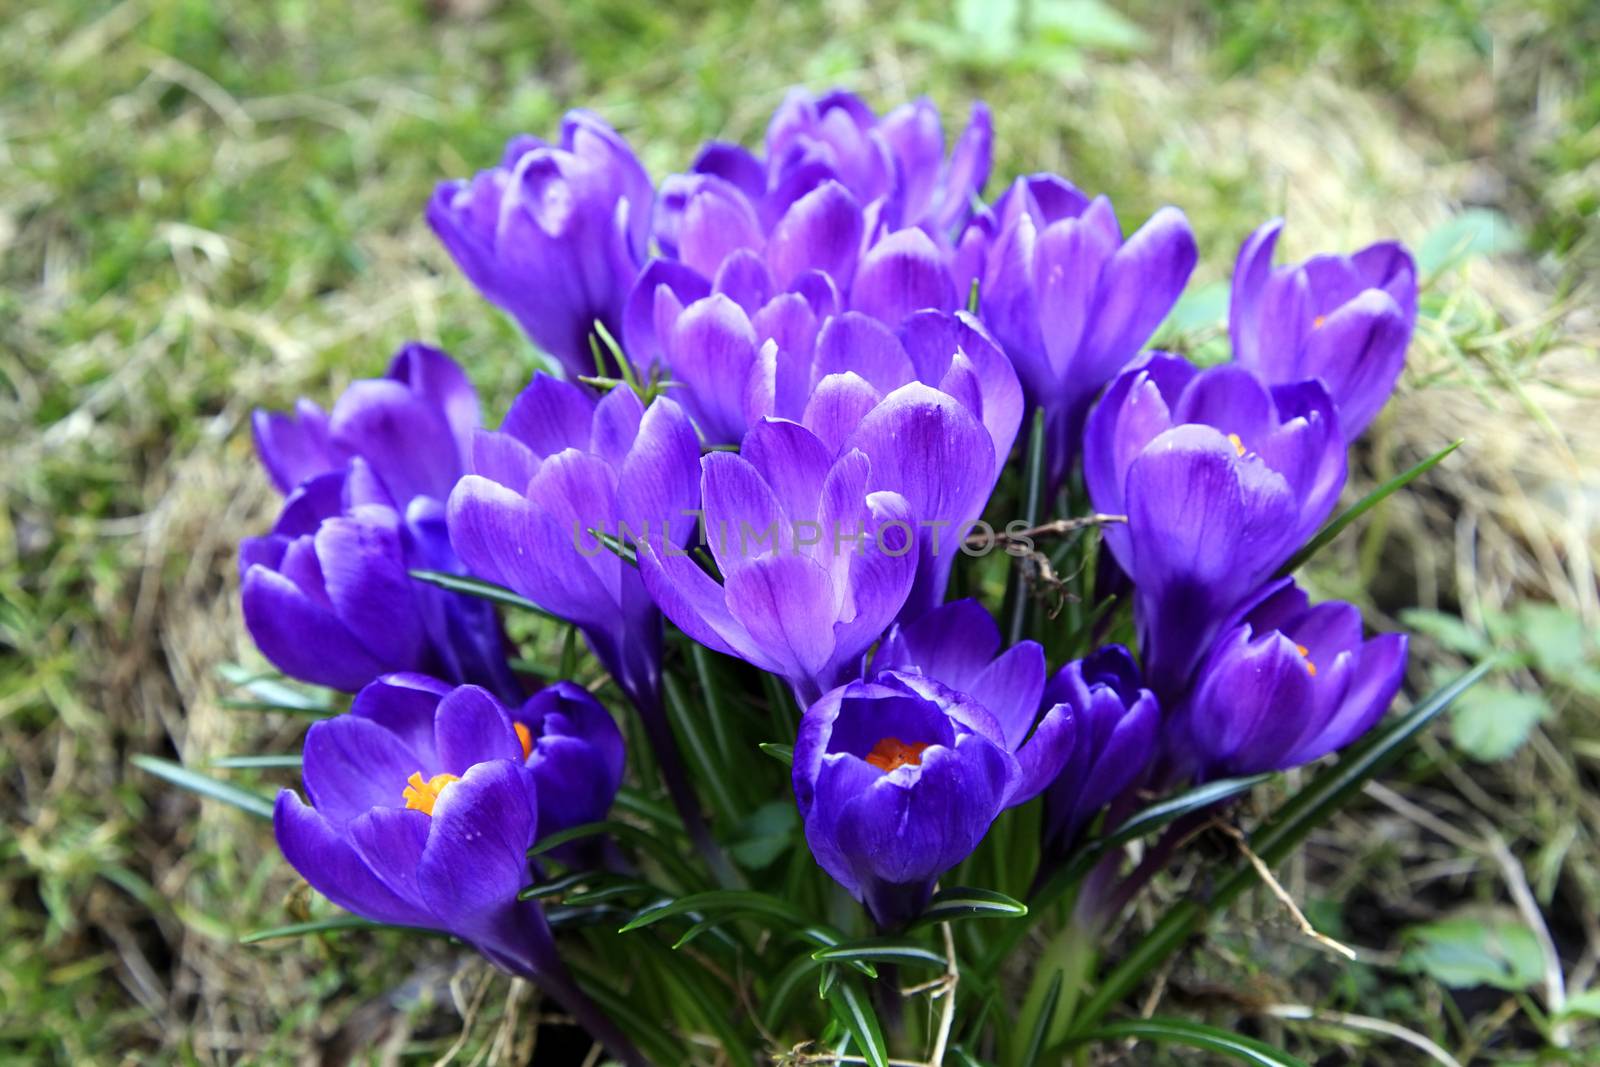 Crocuses in Spring by friday